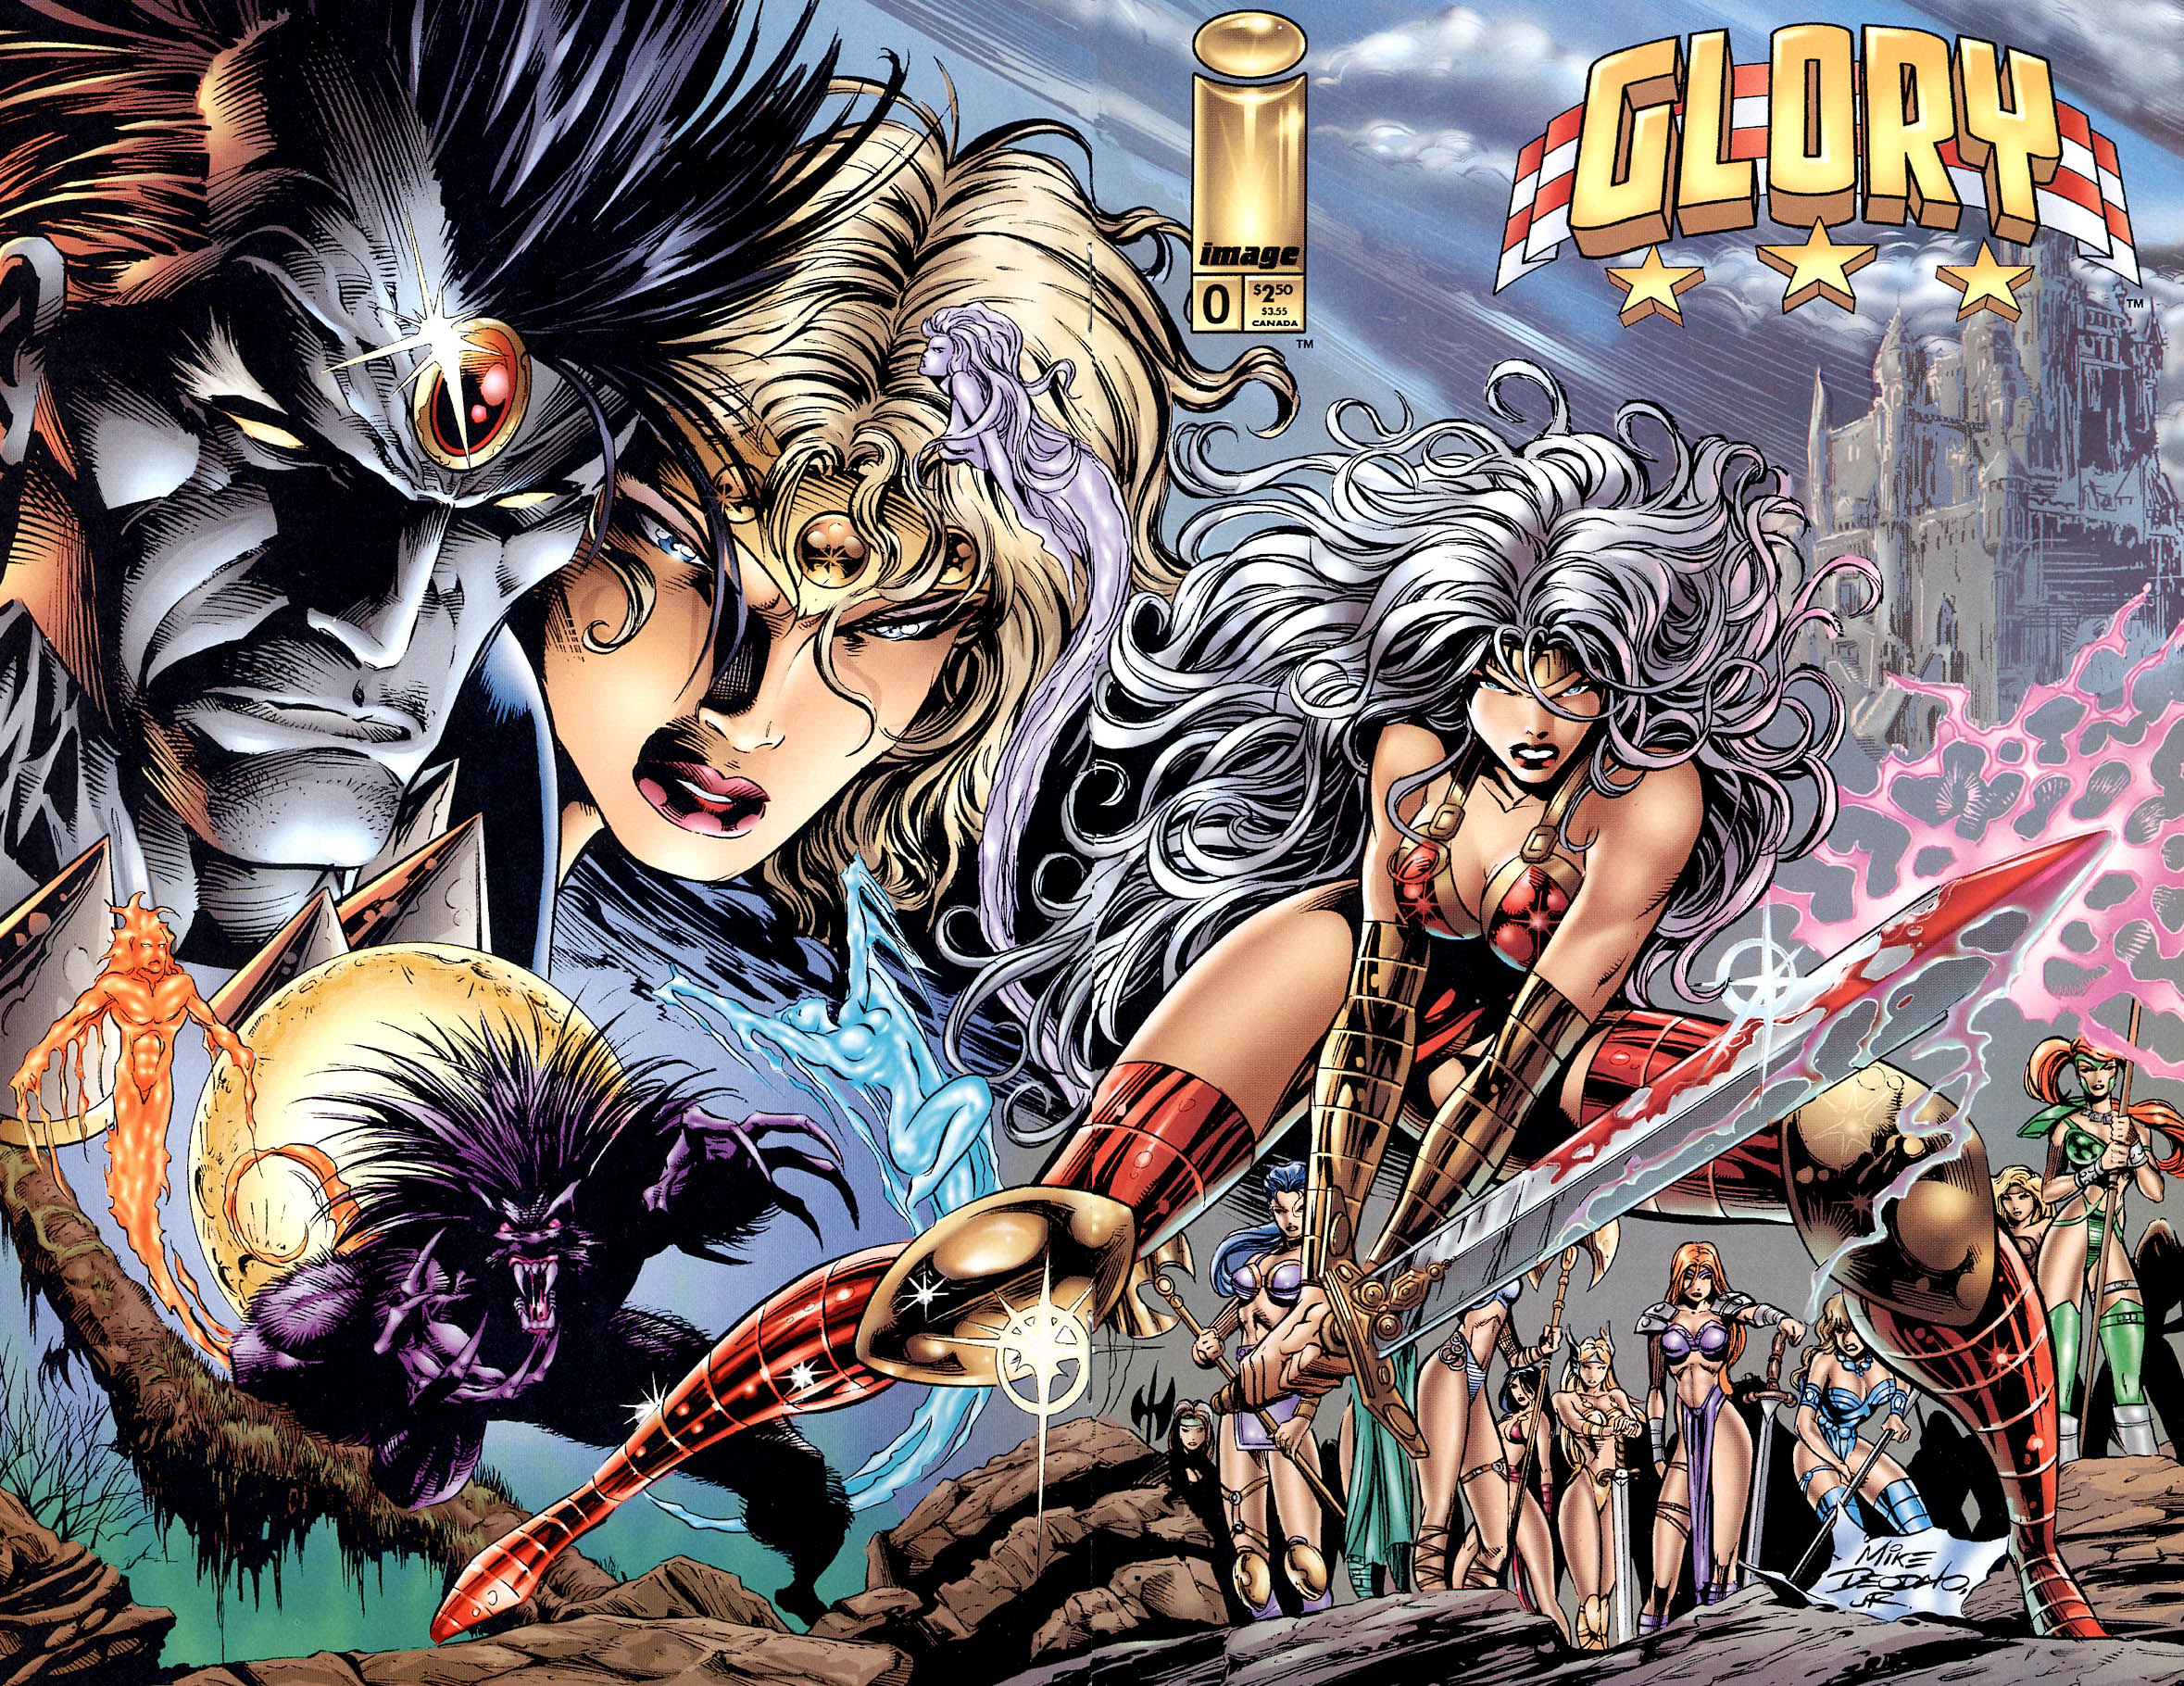 Read online Glory comic -  Issue #0 - 1